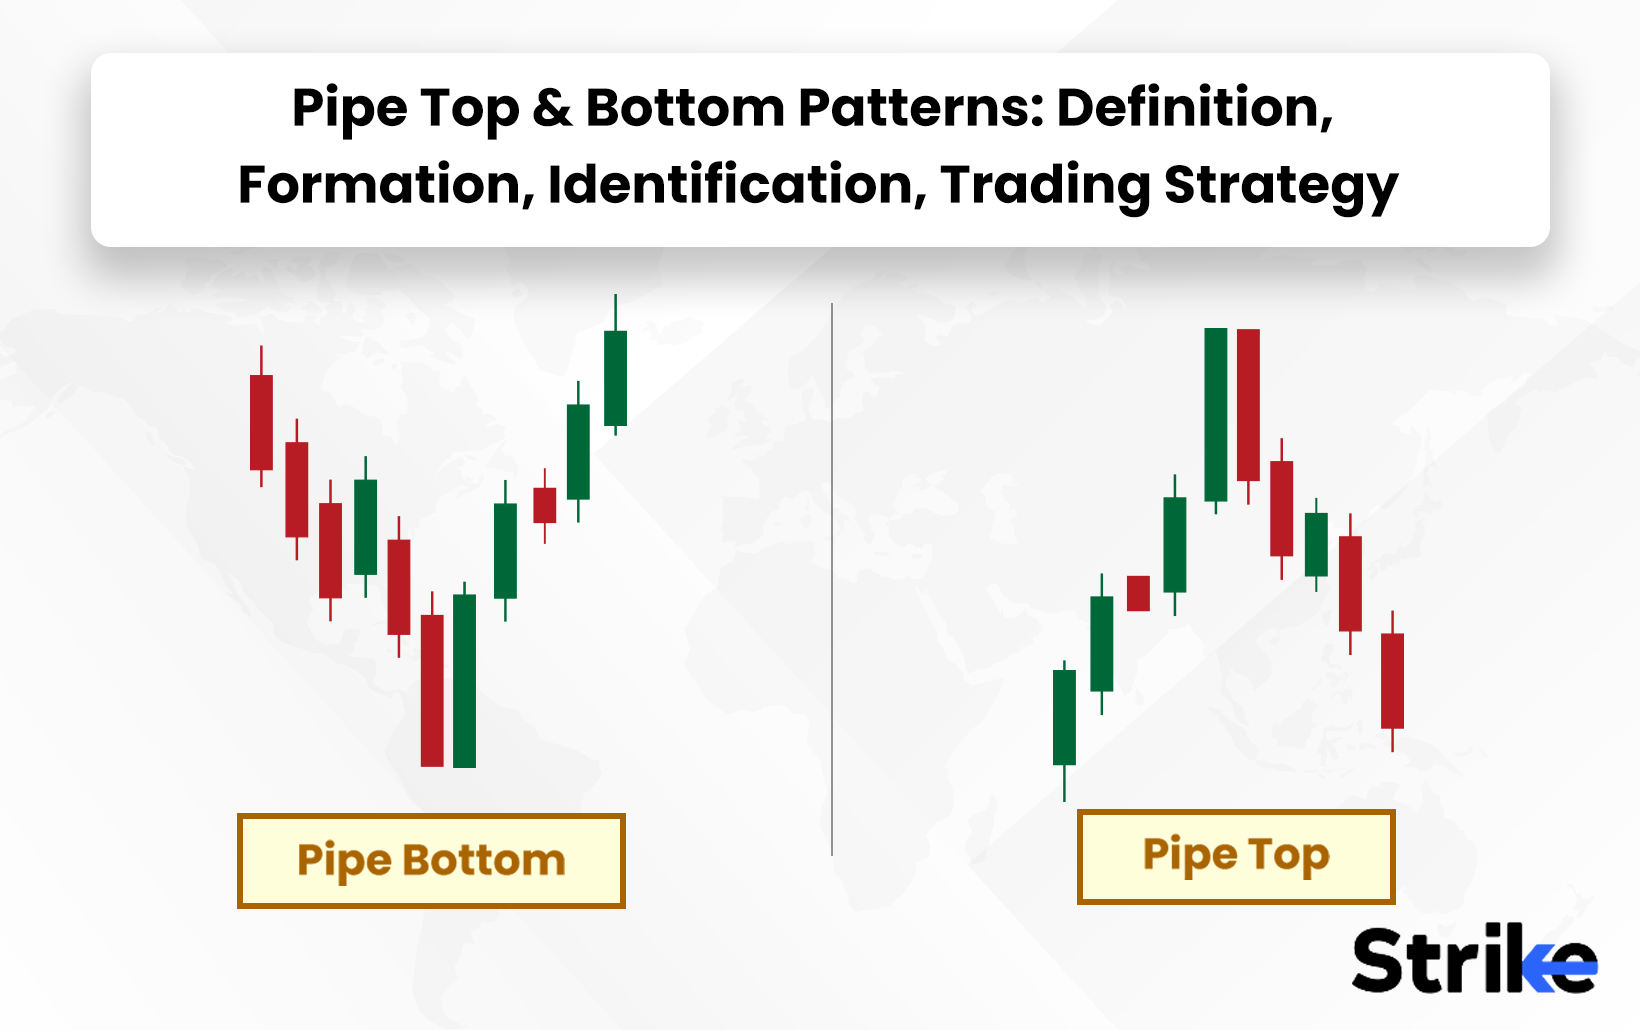 Pipe Top & Bottom Patterns: Definition, Formation, Identification, Trading Strategy